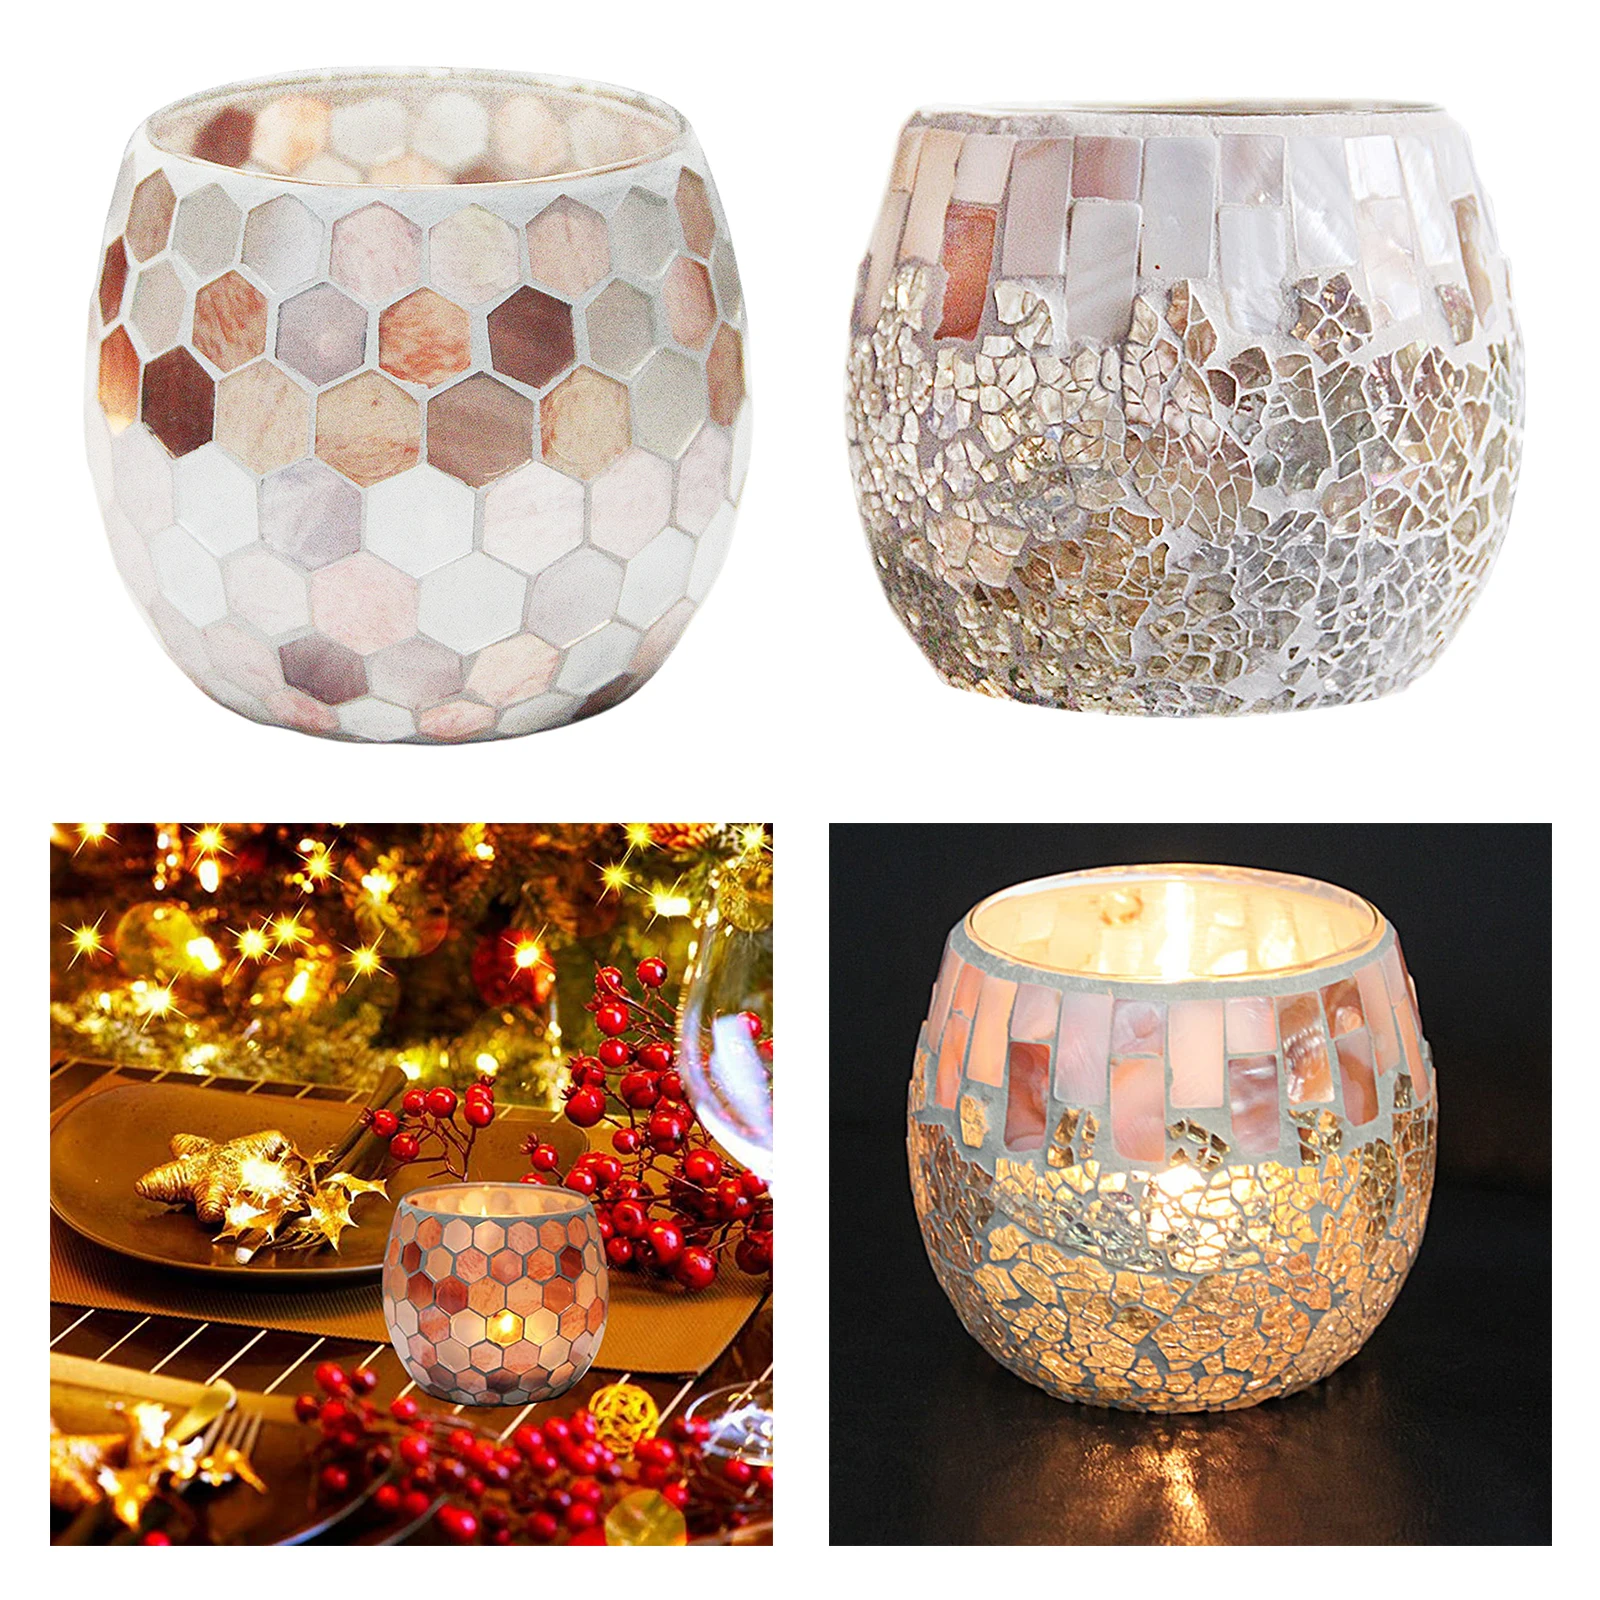 Mosaic Glass Candle Holders, Tea Light Holders Handmade Artwork Gifts for Home